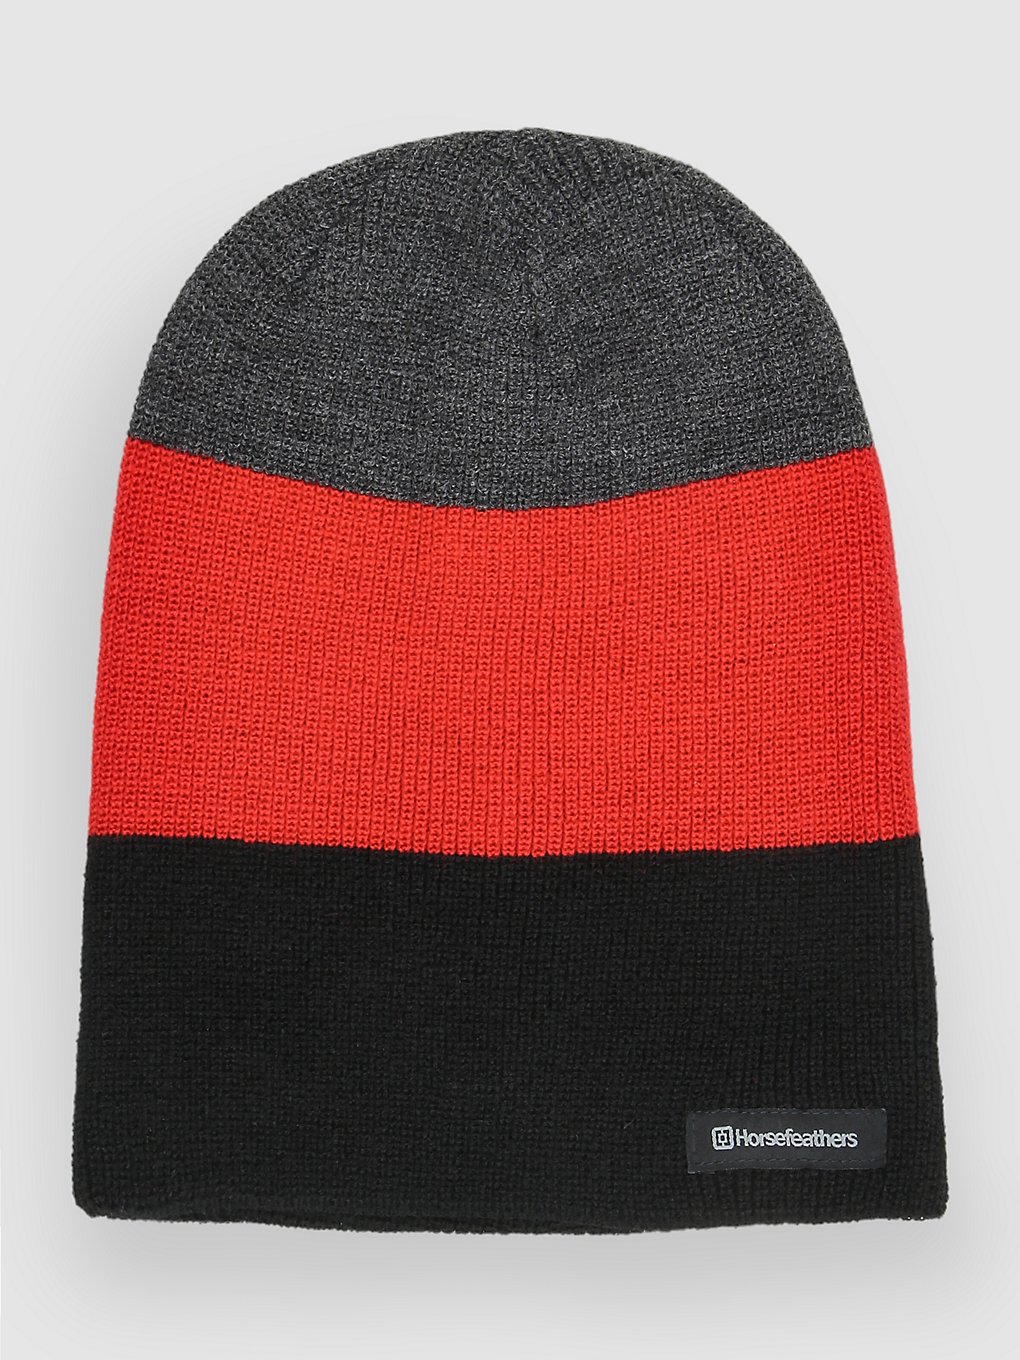 Horsefeathers Matteo Beanie flame red kaufen